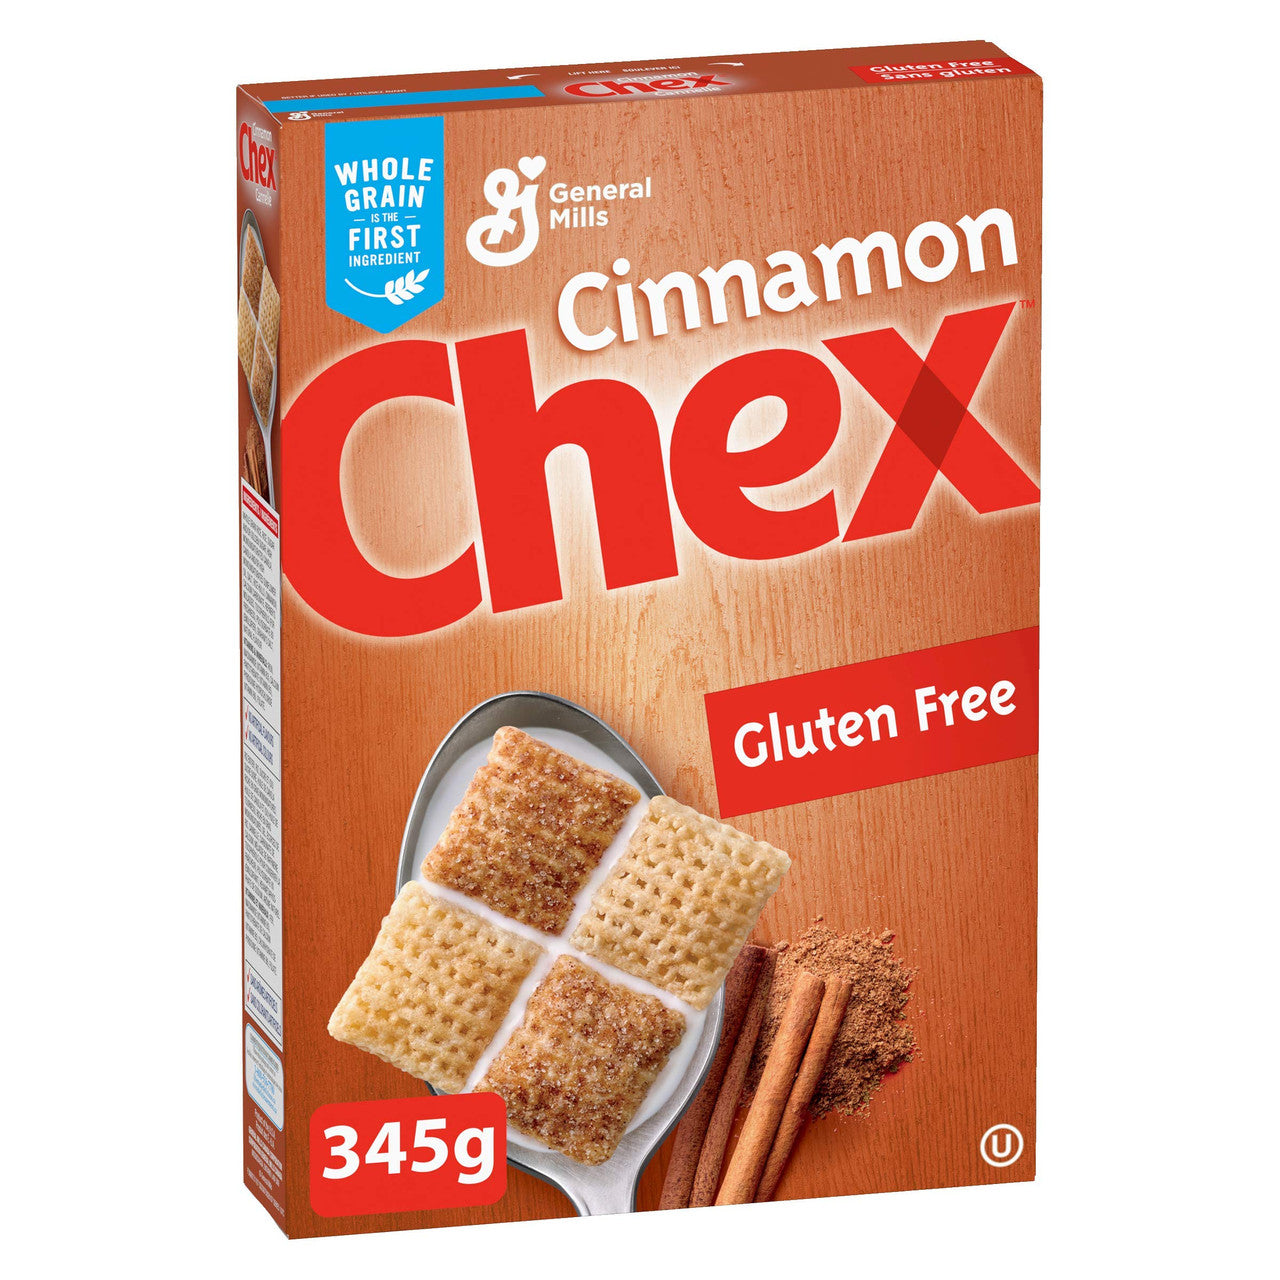 Chex Gluten Free Cinnamon Cereal, 345g/12.1oz, (Imported from Canada)